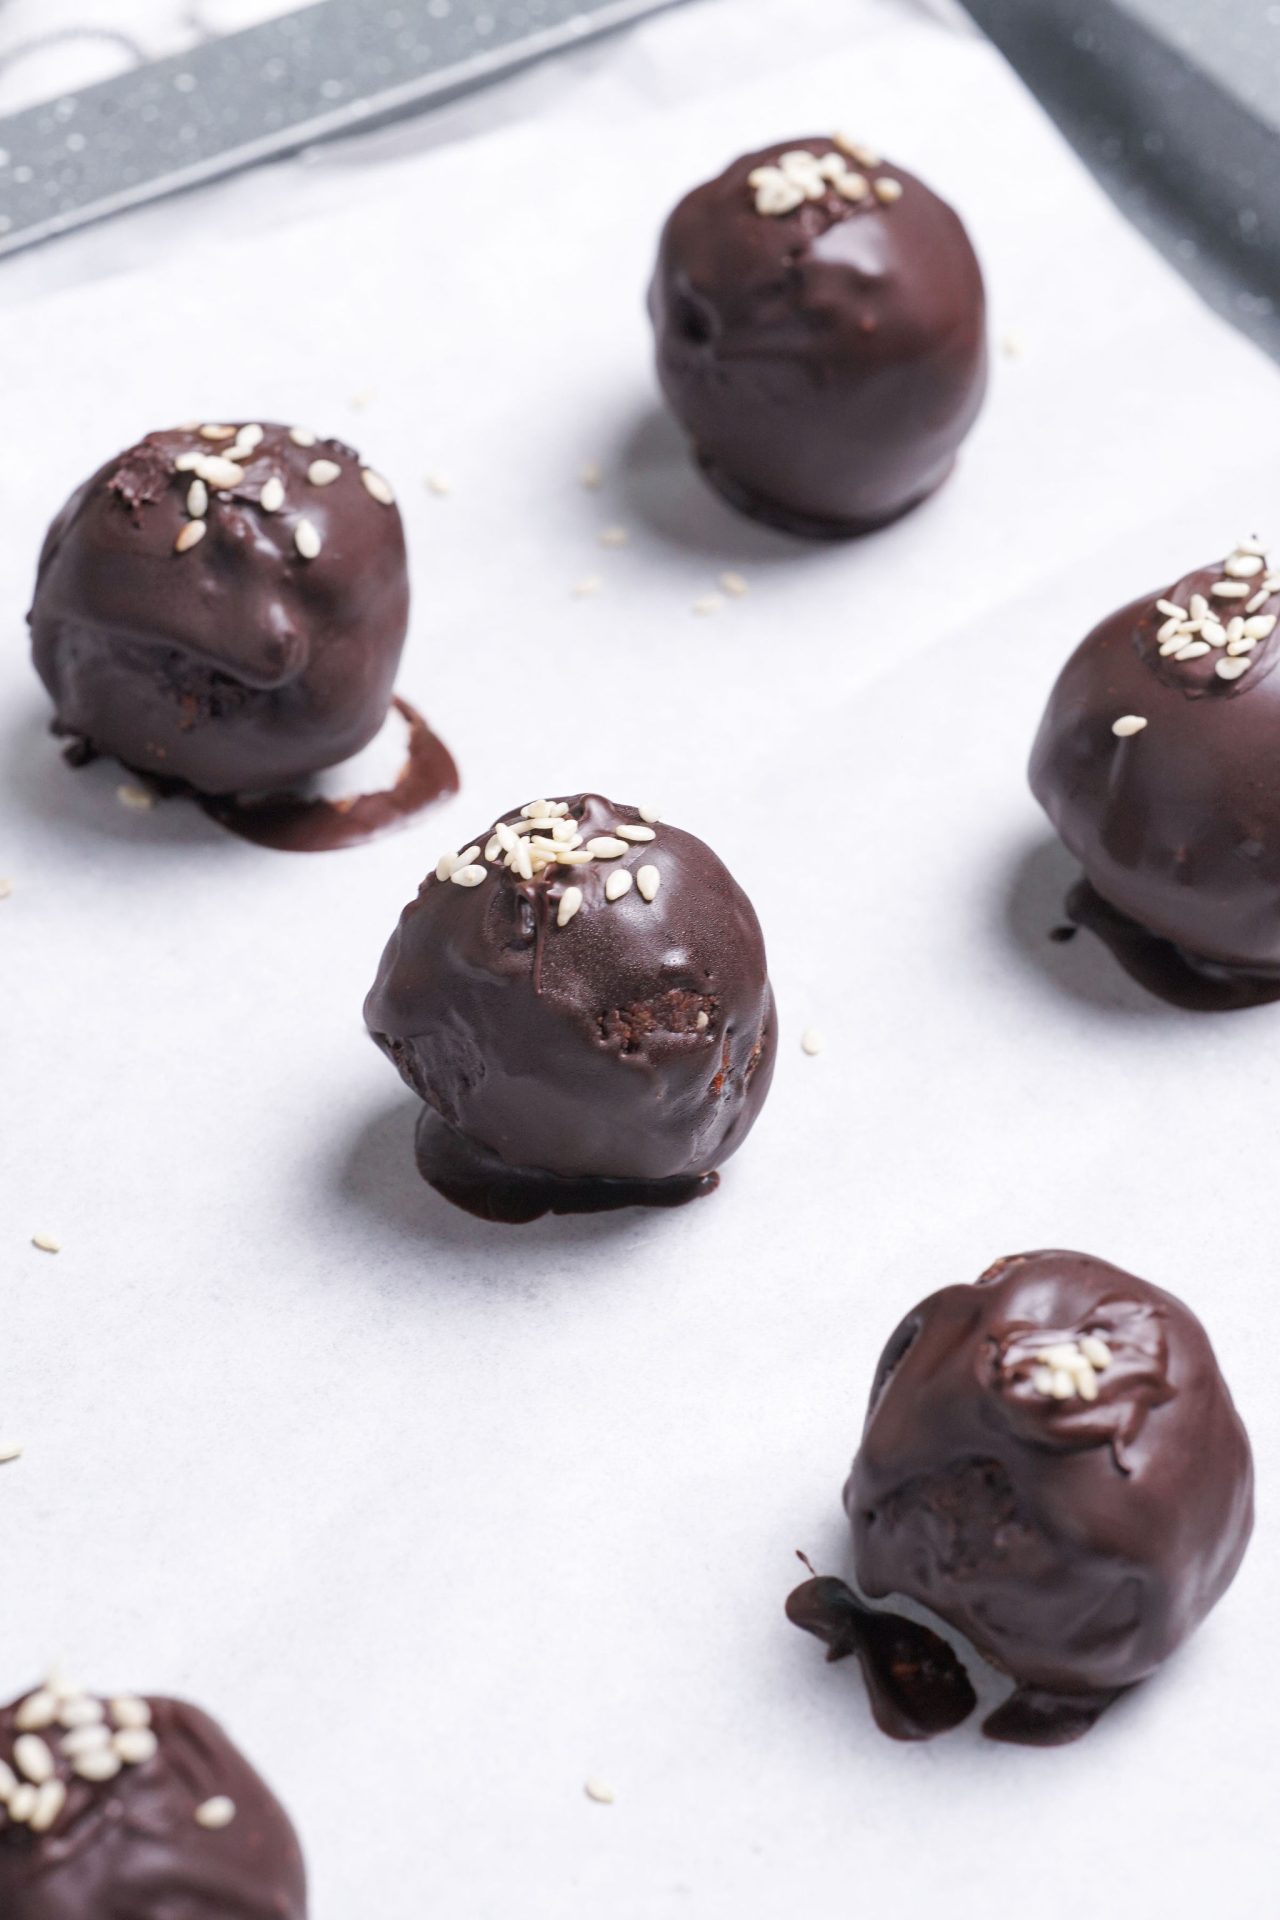 Healthy chocolate truffles made with nuts and medjool dates. Coated in dairy free dark chocolate.